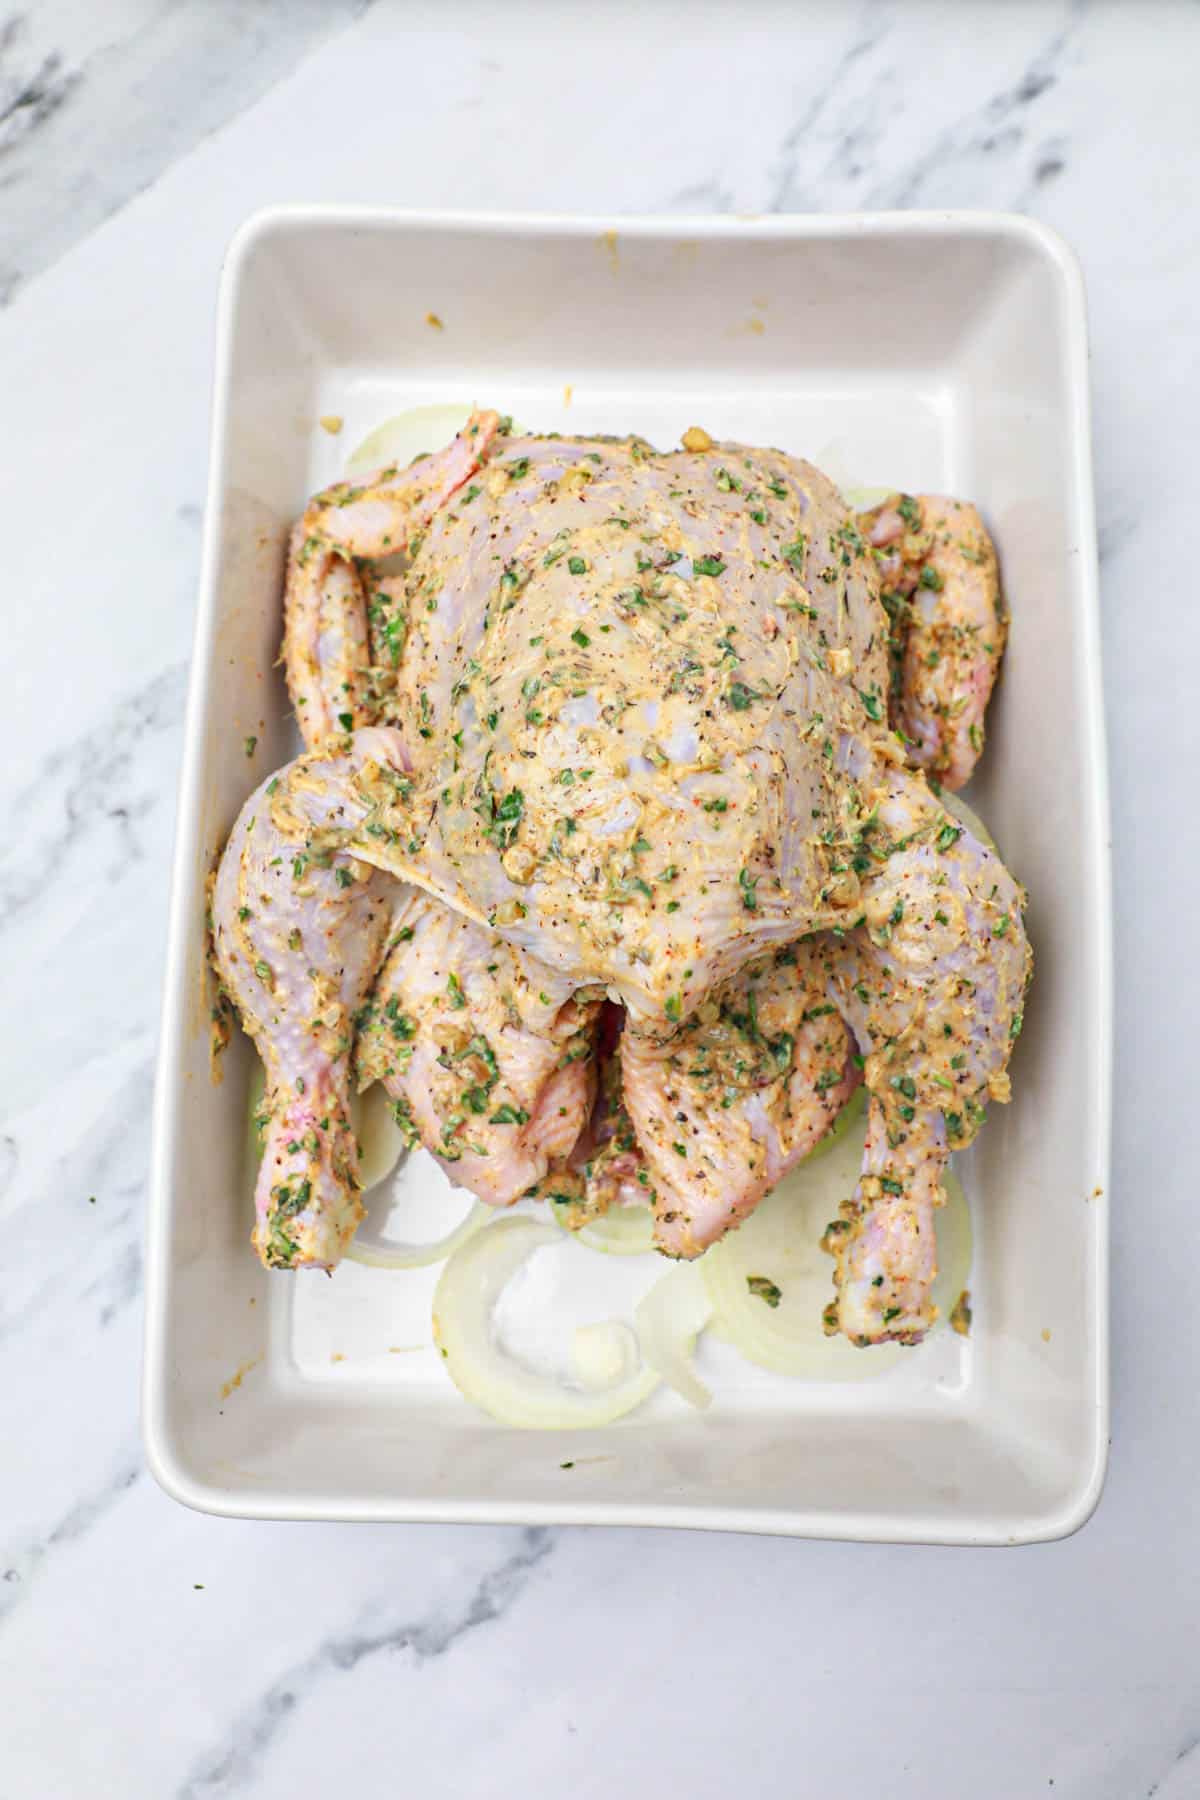 the buttered chicken on a baking dish.